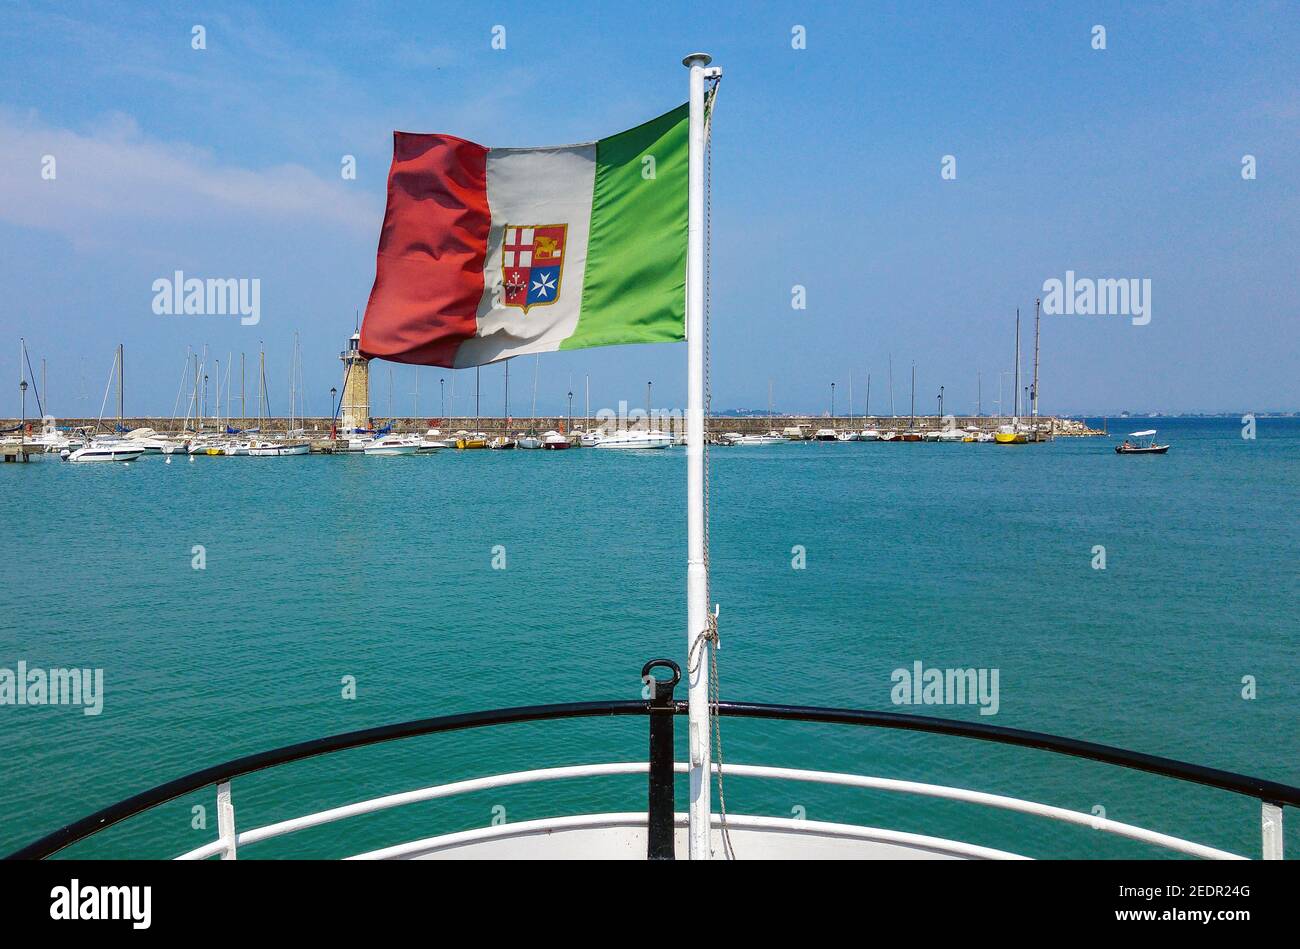 View from stern of ship with italian flag on pole. Stock Photo